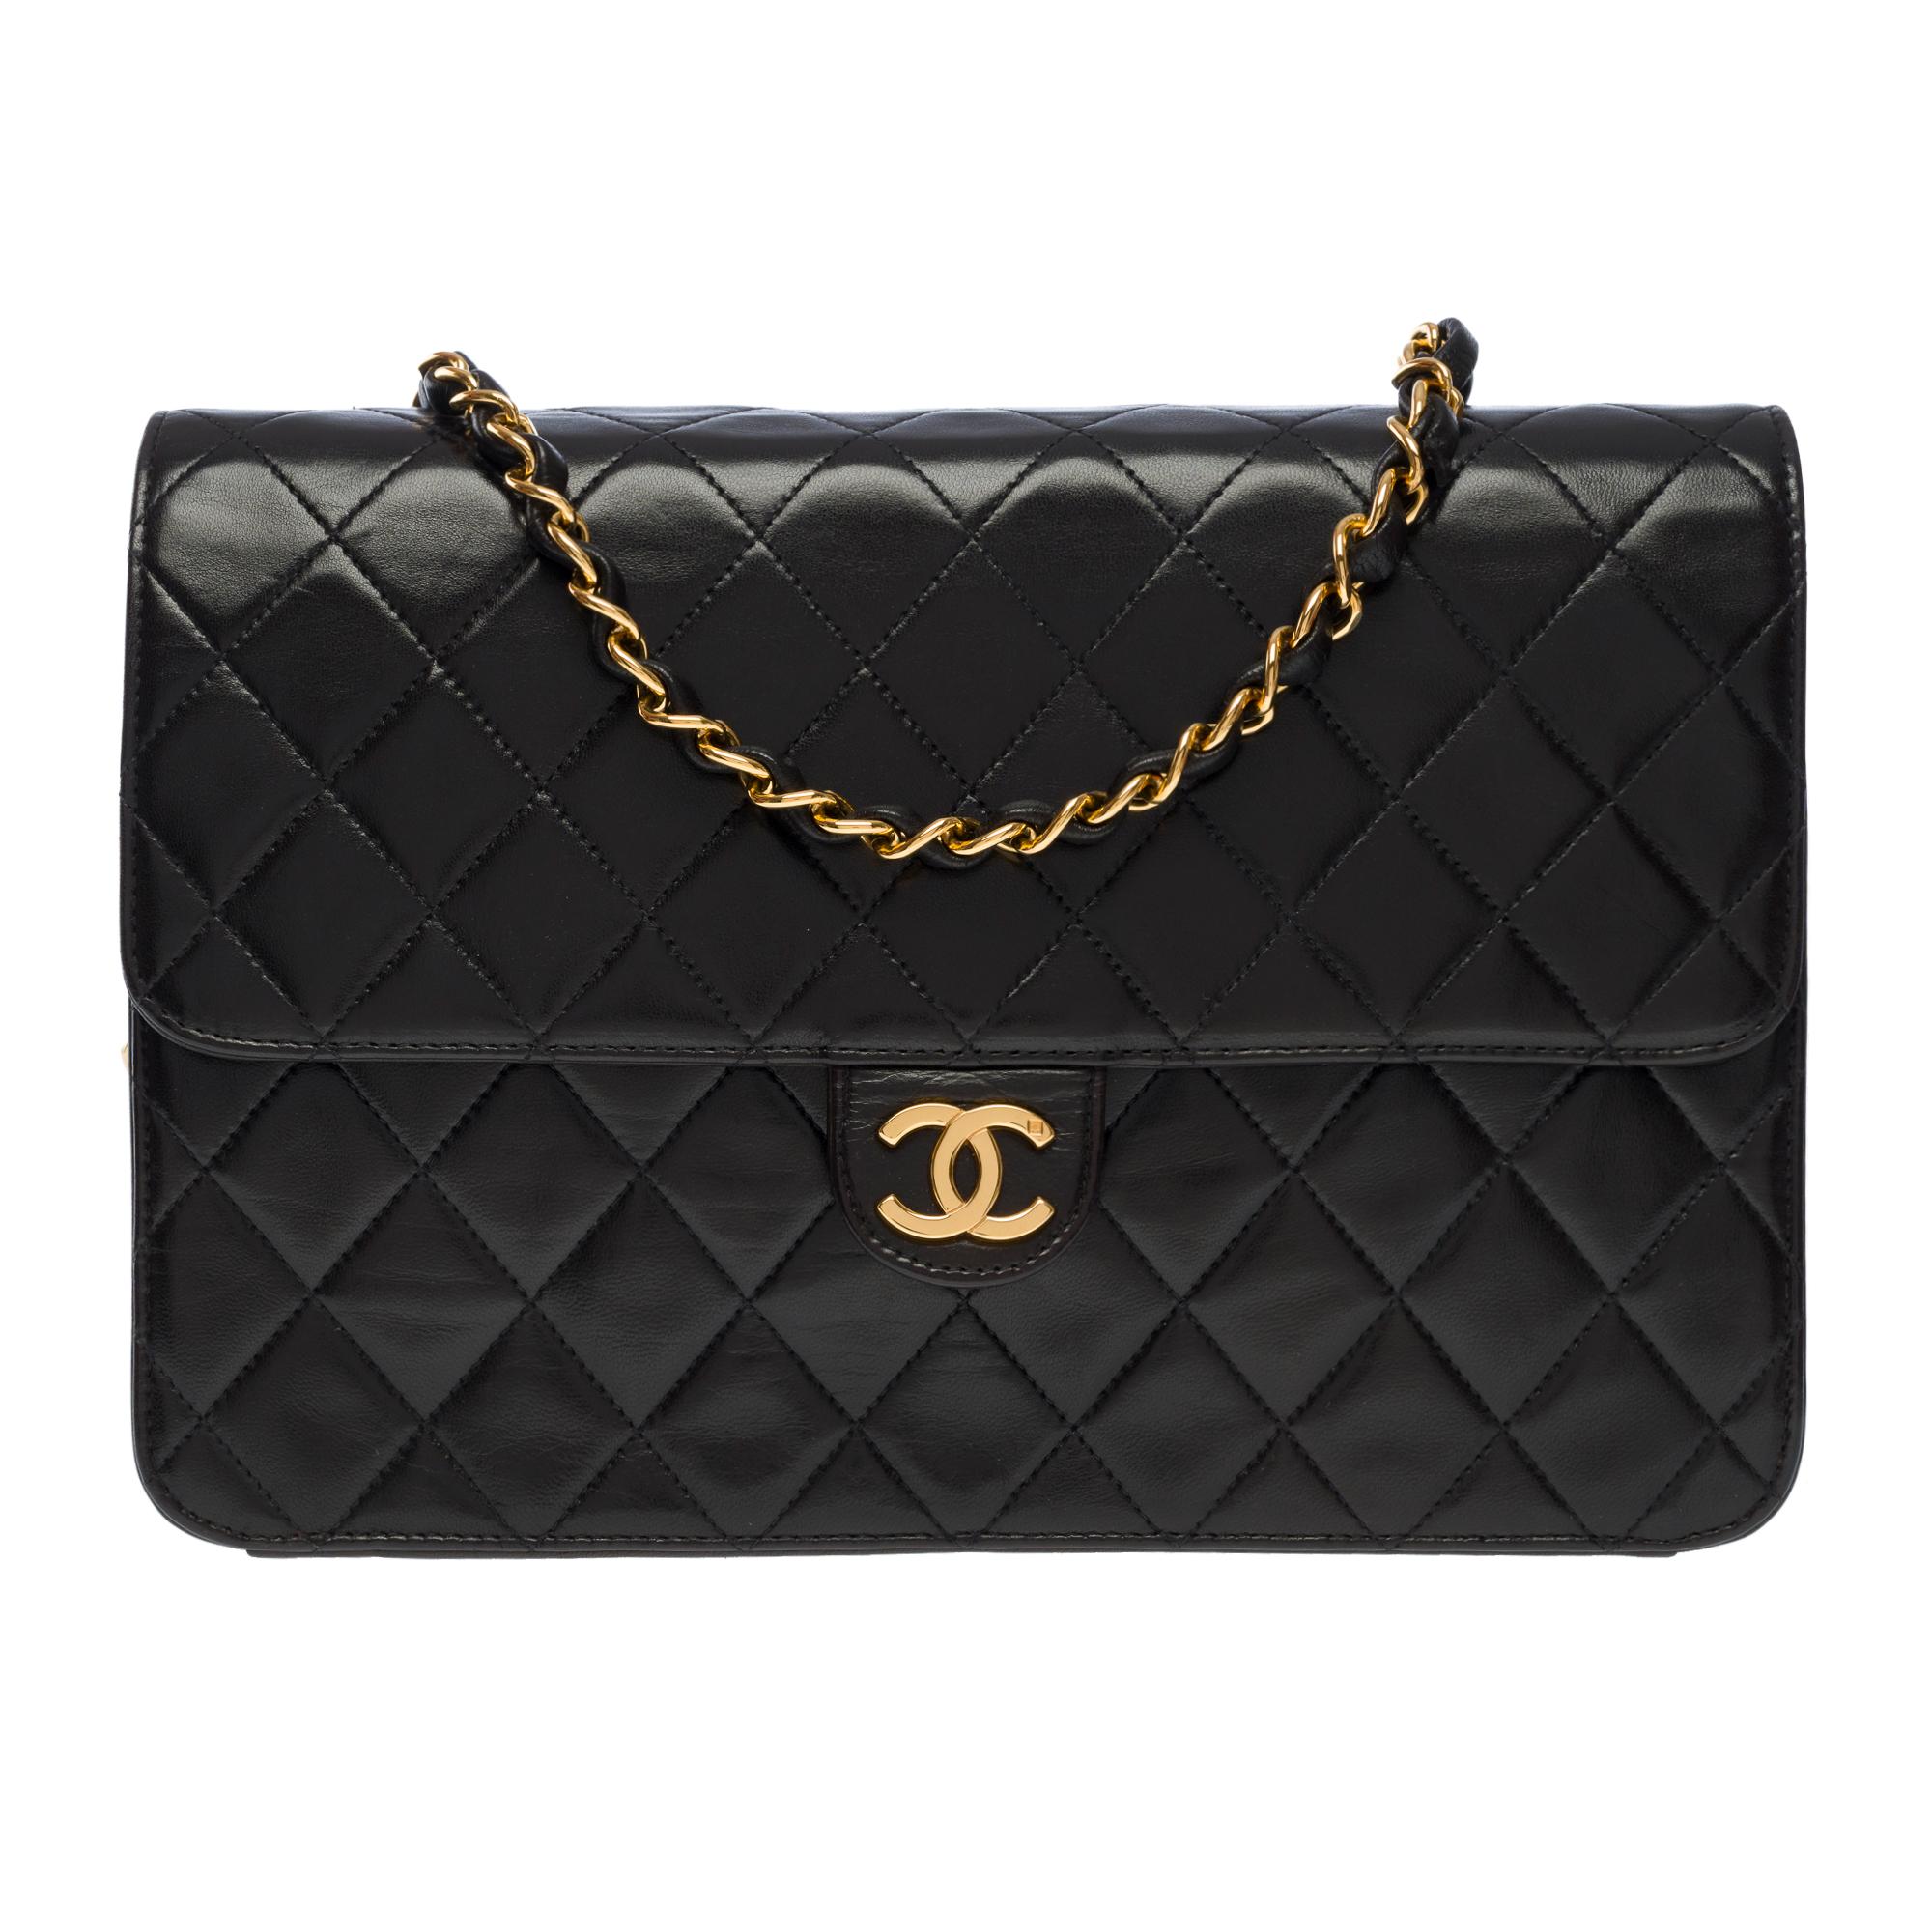 Very chic Chanel Classic shoulder flap bag in black quilted lambskin, gold-plated metal hardware, a gold-plated metal chain handle interlaced with black leather for a shoulder or crossbody carry

Flap closure, gold-tone CC clasp
Single Flap
Burgundy